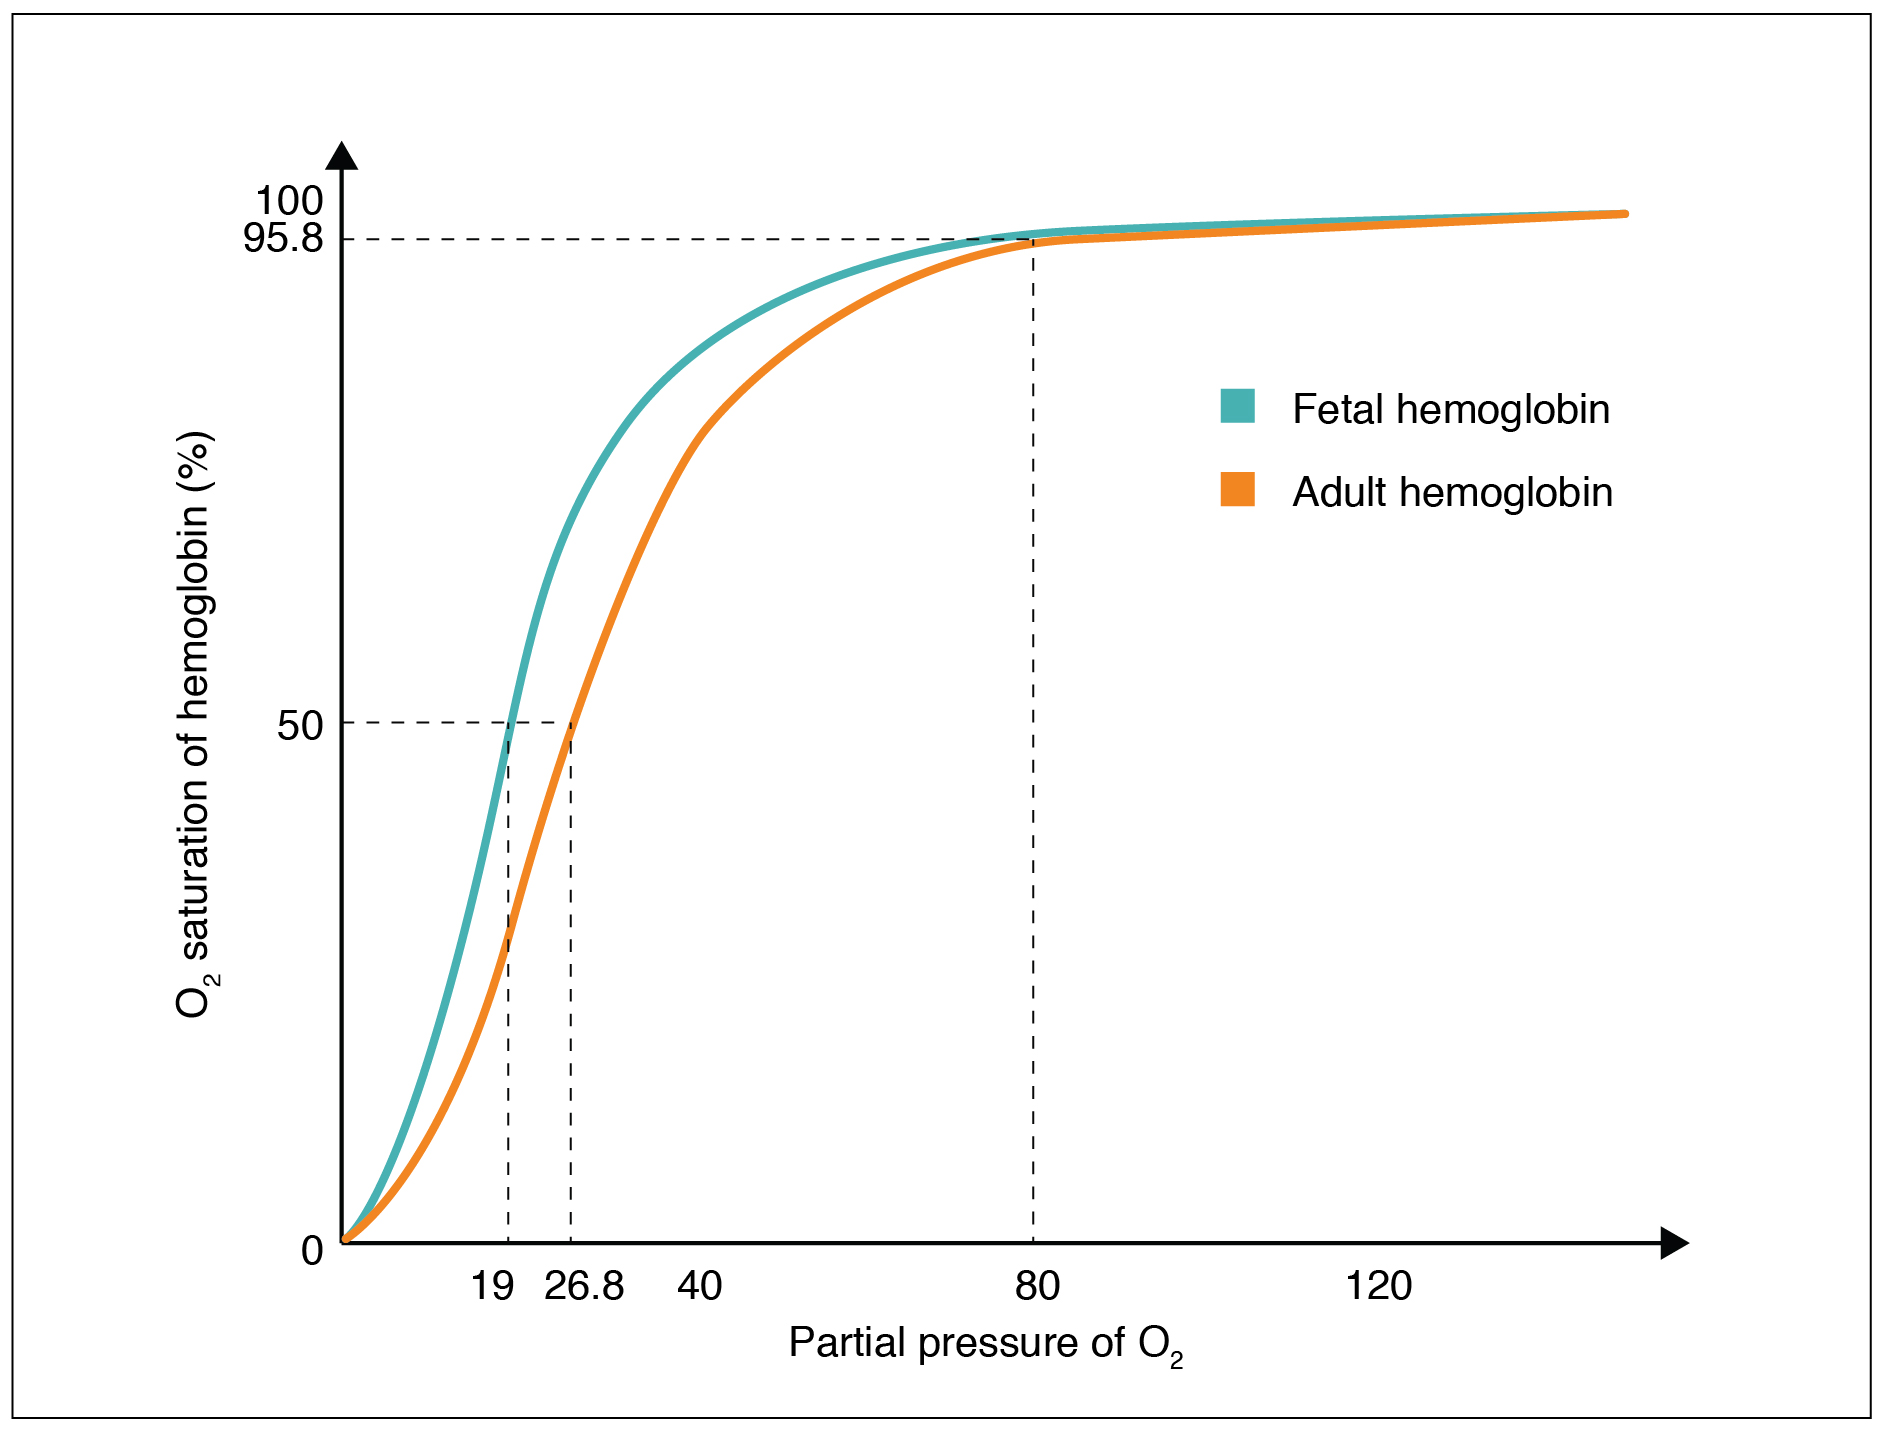 This graph shows the oxygen saturation versus the partial pressure of oxygen in fetal hemoglobin and adult hemoglobin.